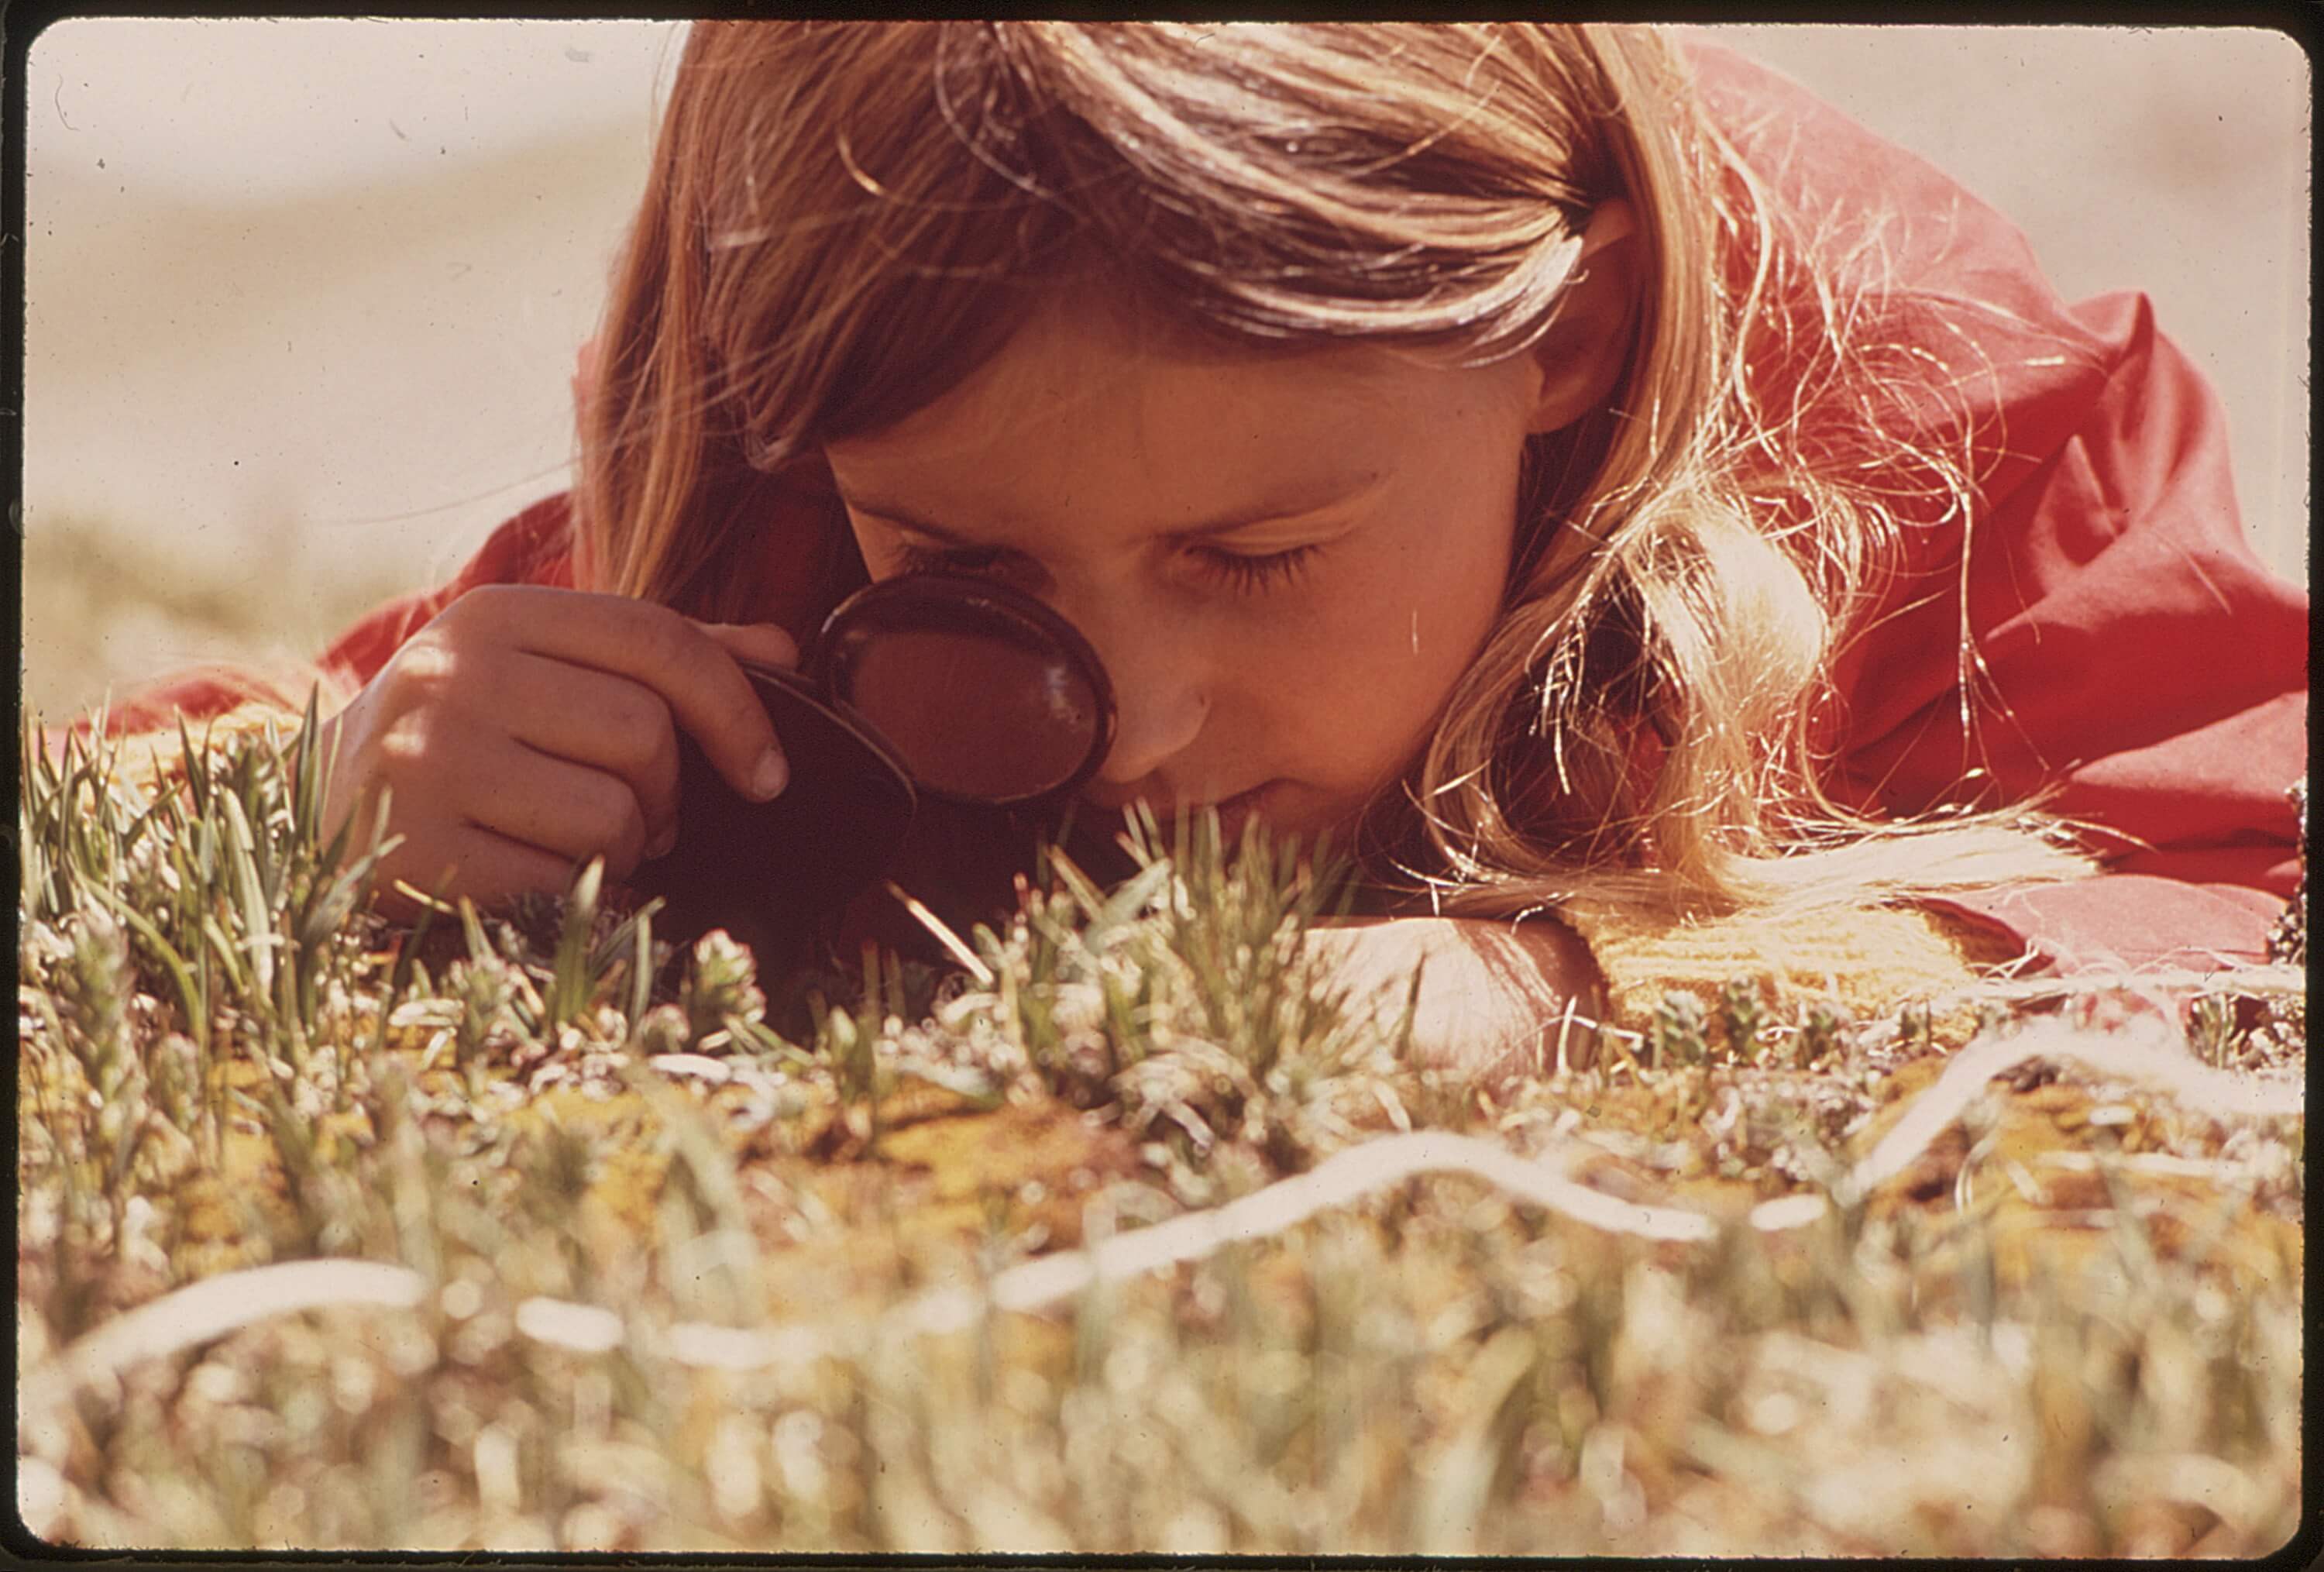 A young girl using a magnifying glass to look for insects in a grassy field